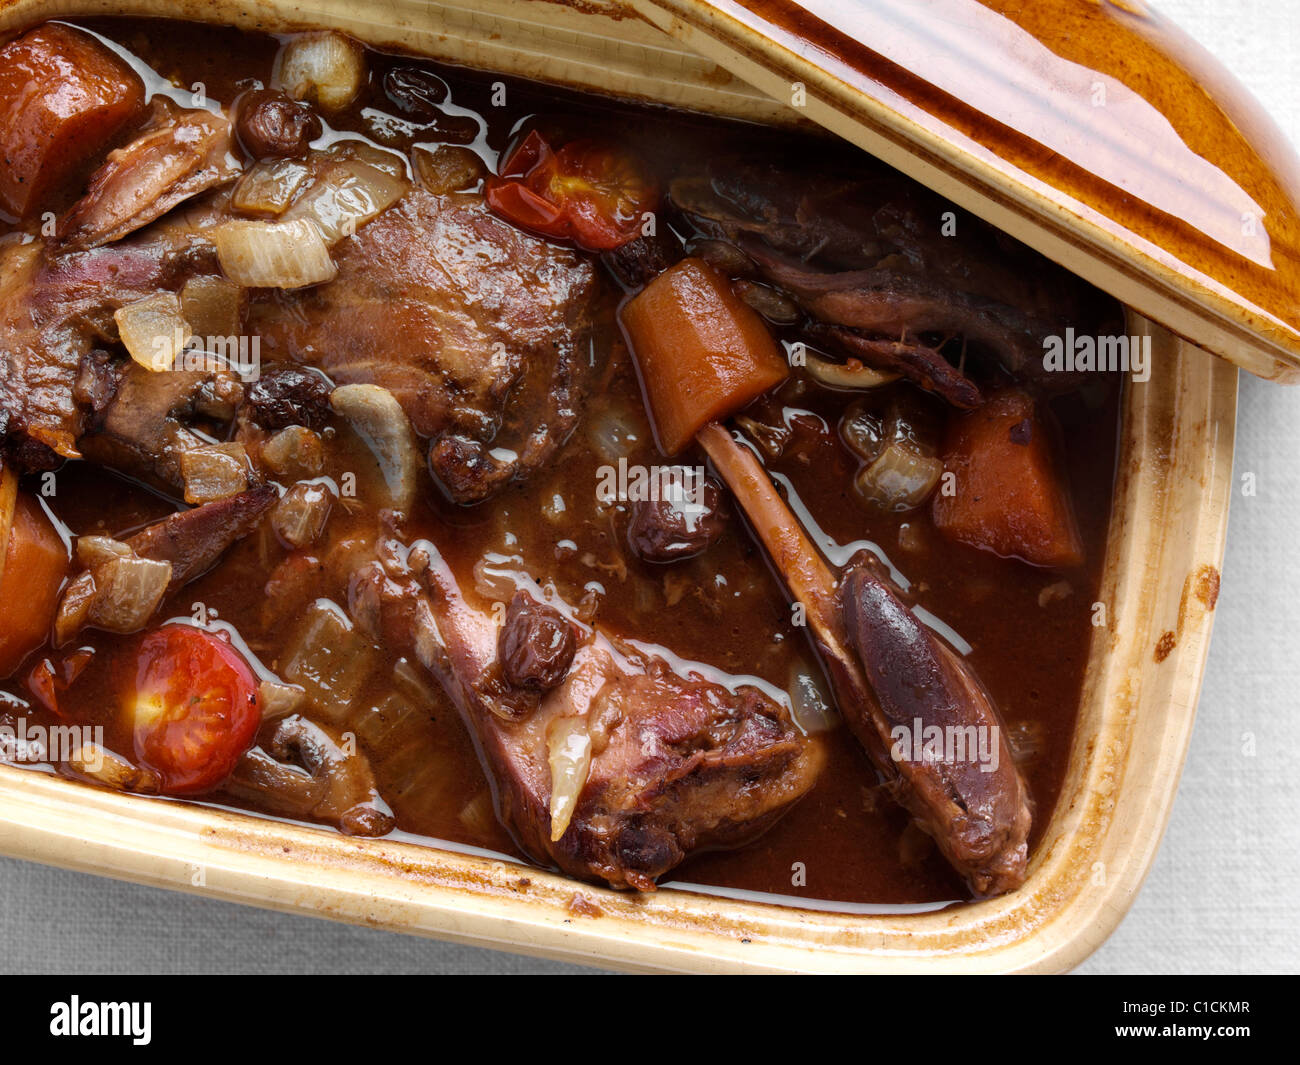 A rustic pot of rabbit stew traditional comfort main meals Stock Photo